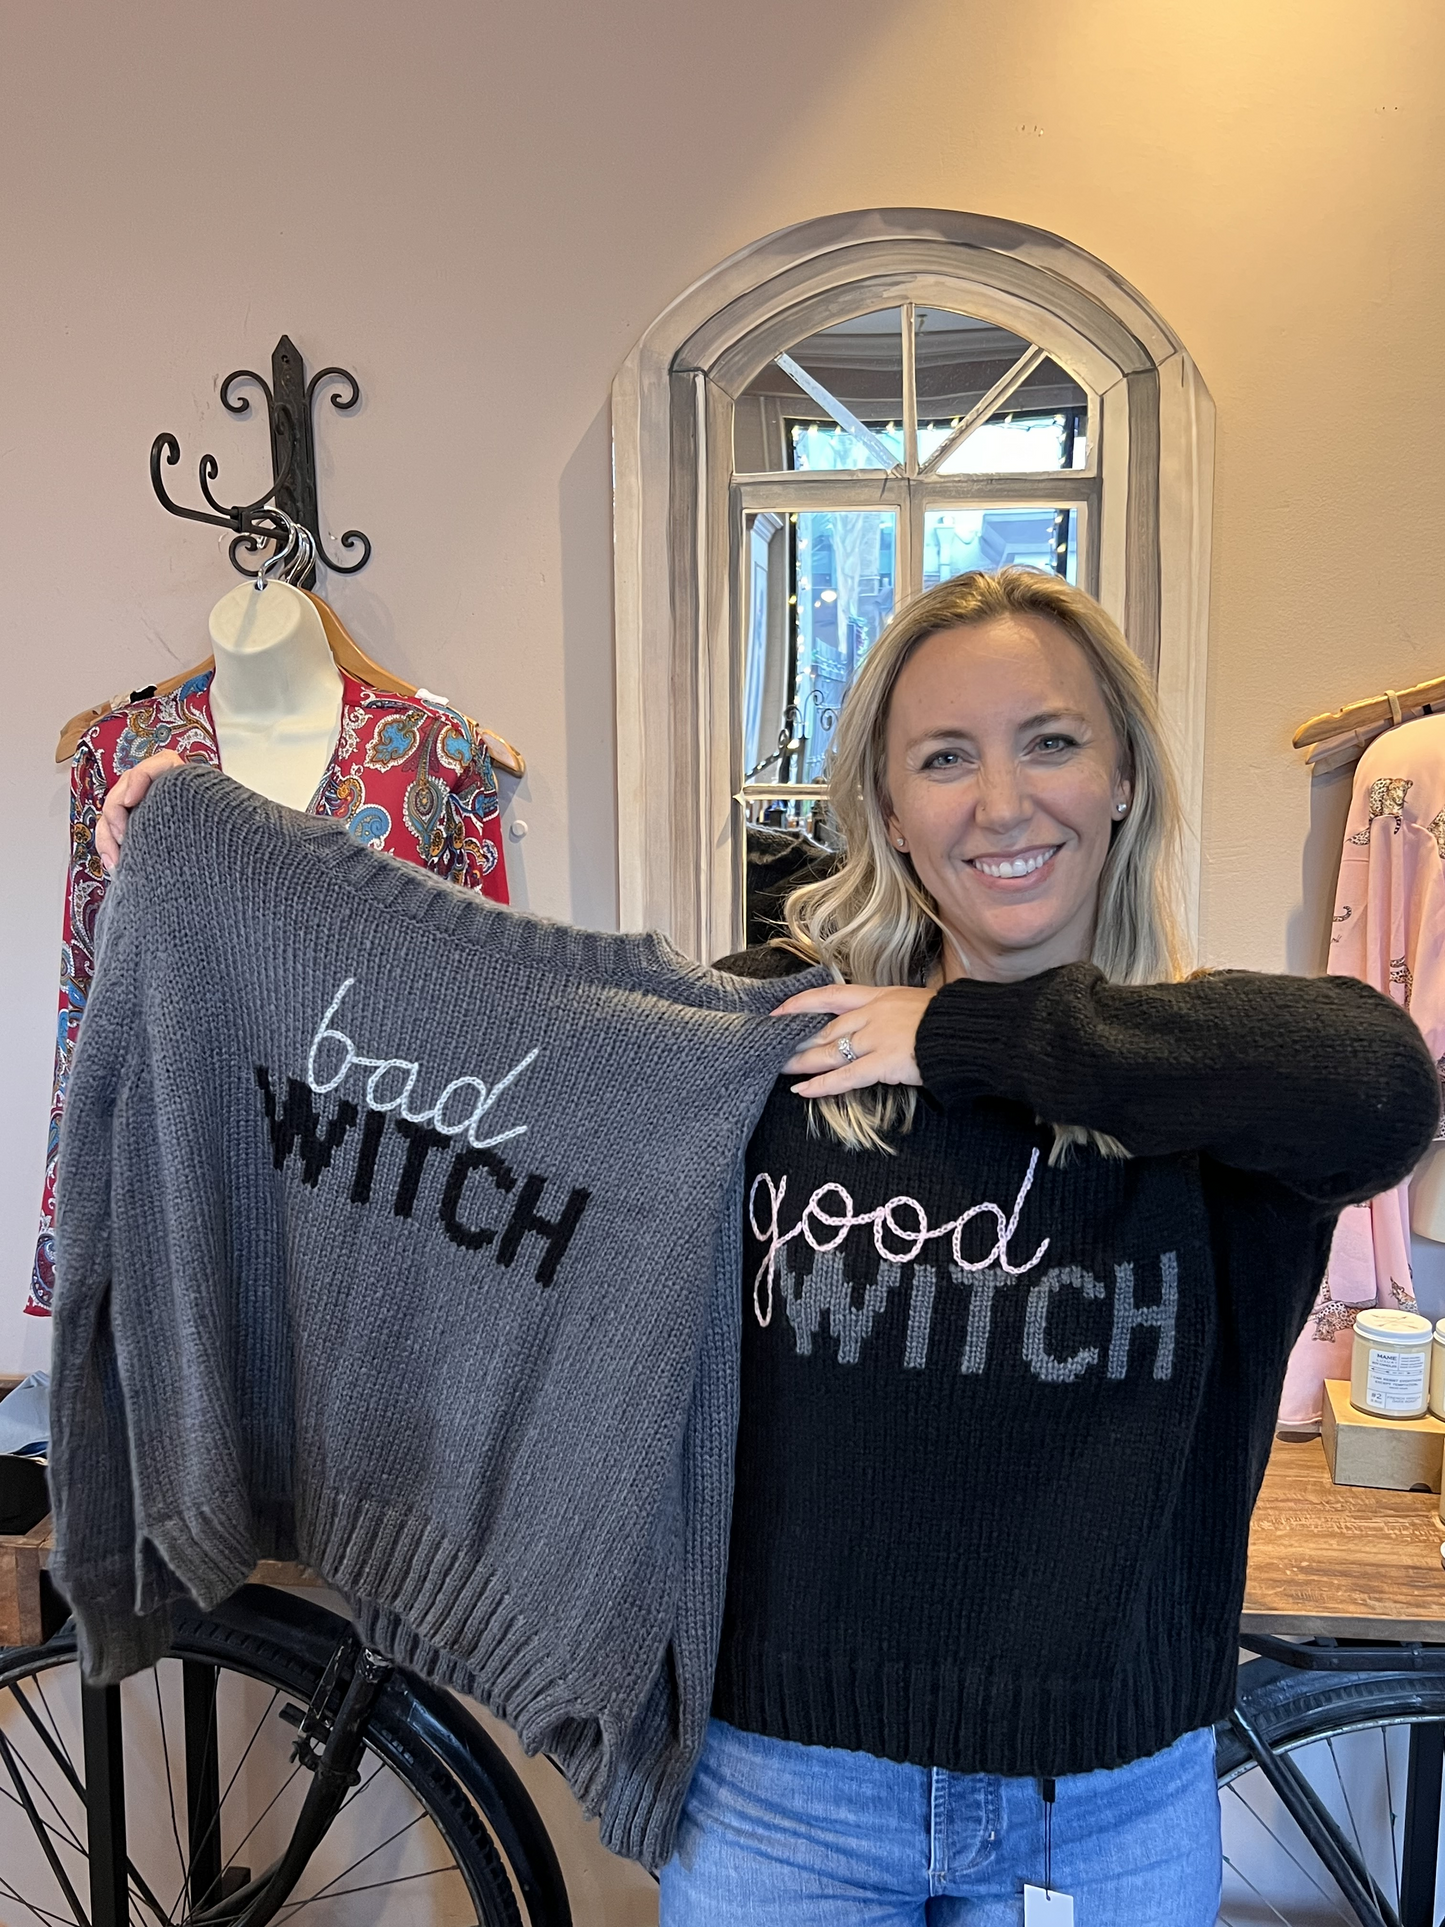 Bad Witch/Good Witch Sweaters